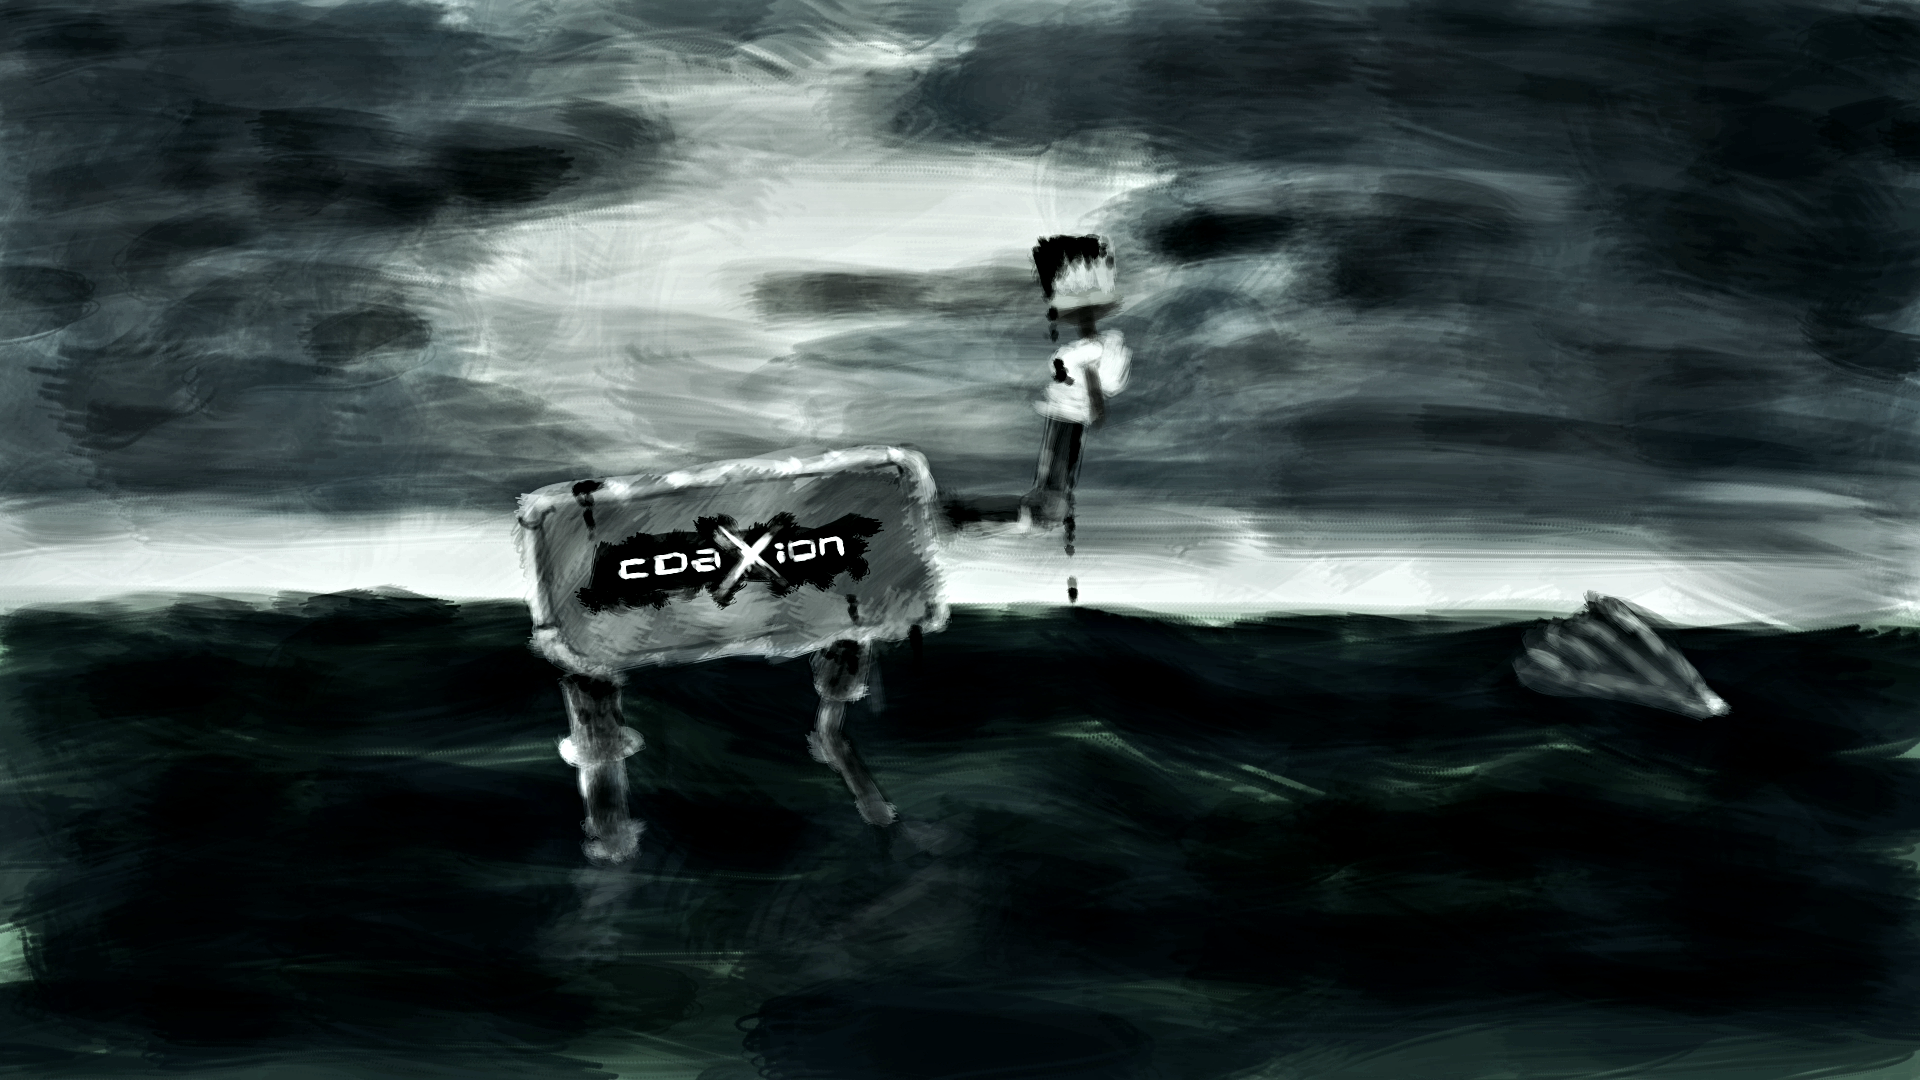 A sign in the middle of an ocean holding a paintbrush. it painted the coaxion logo onto itself